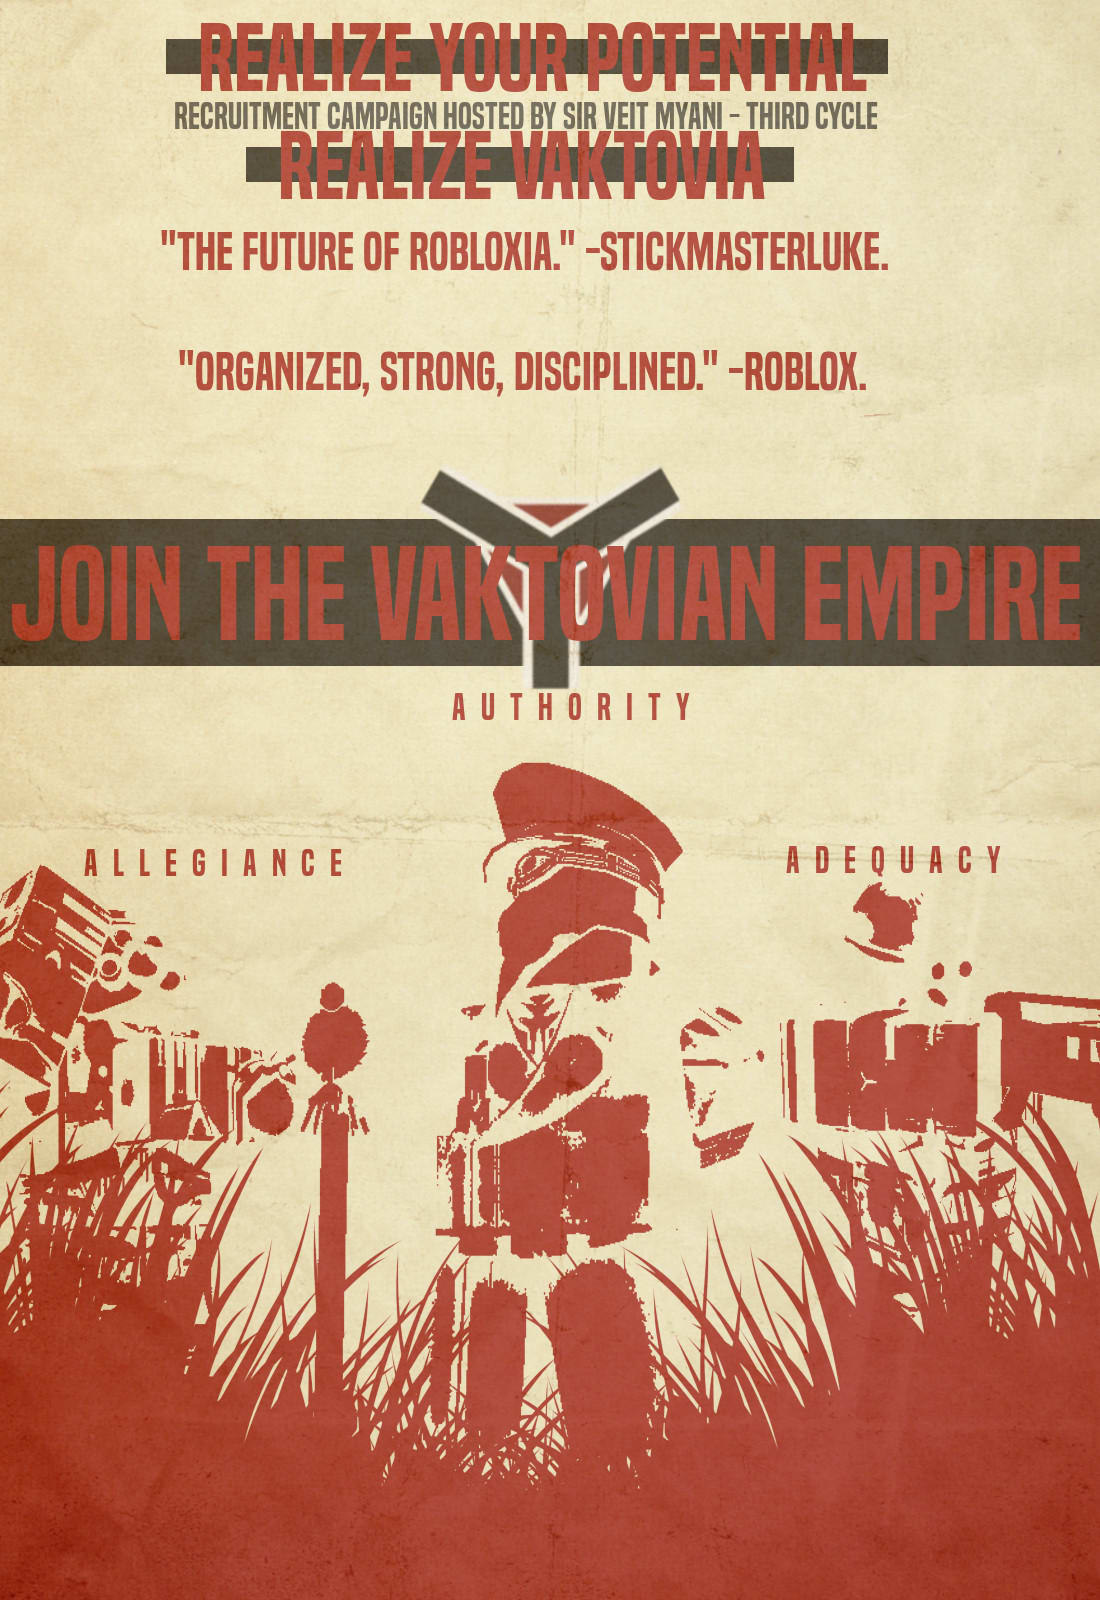 Create Your Propaganda Style Poster For Any Needs By Skayrooz Fiverr - roblox propaganda poster